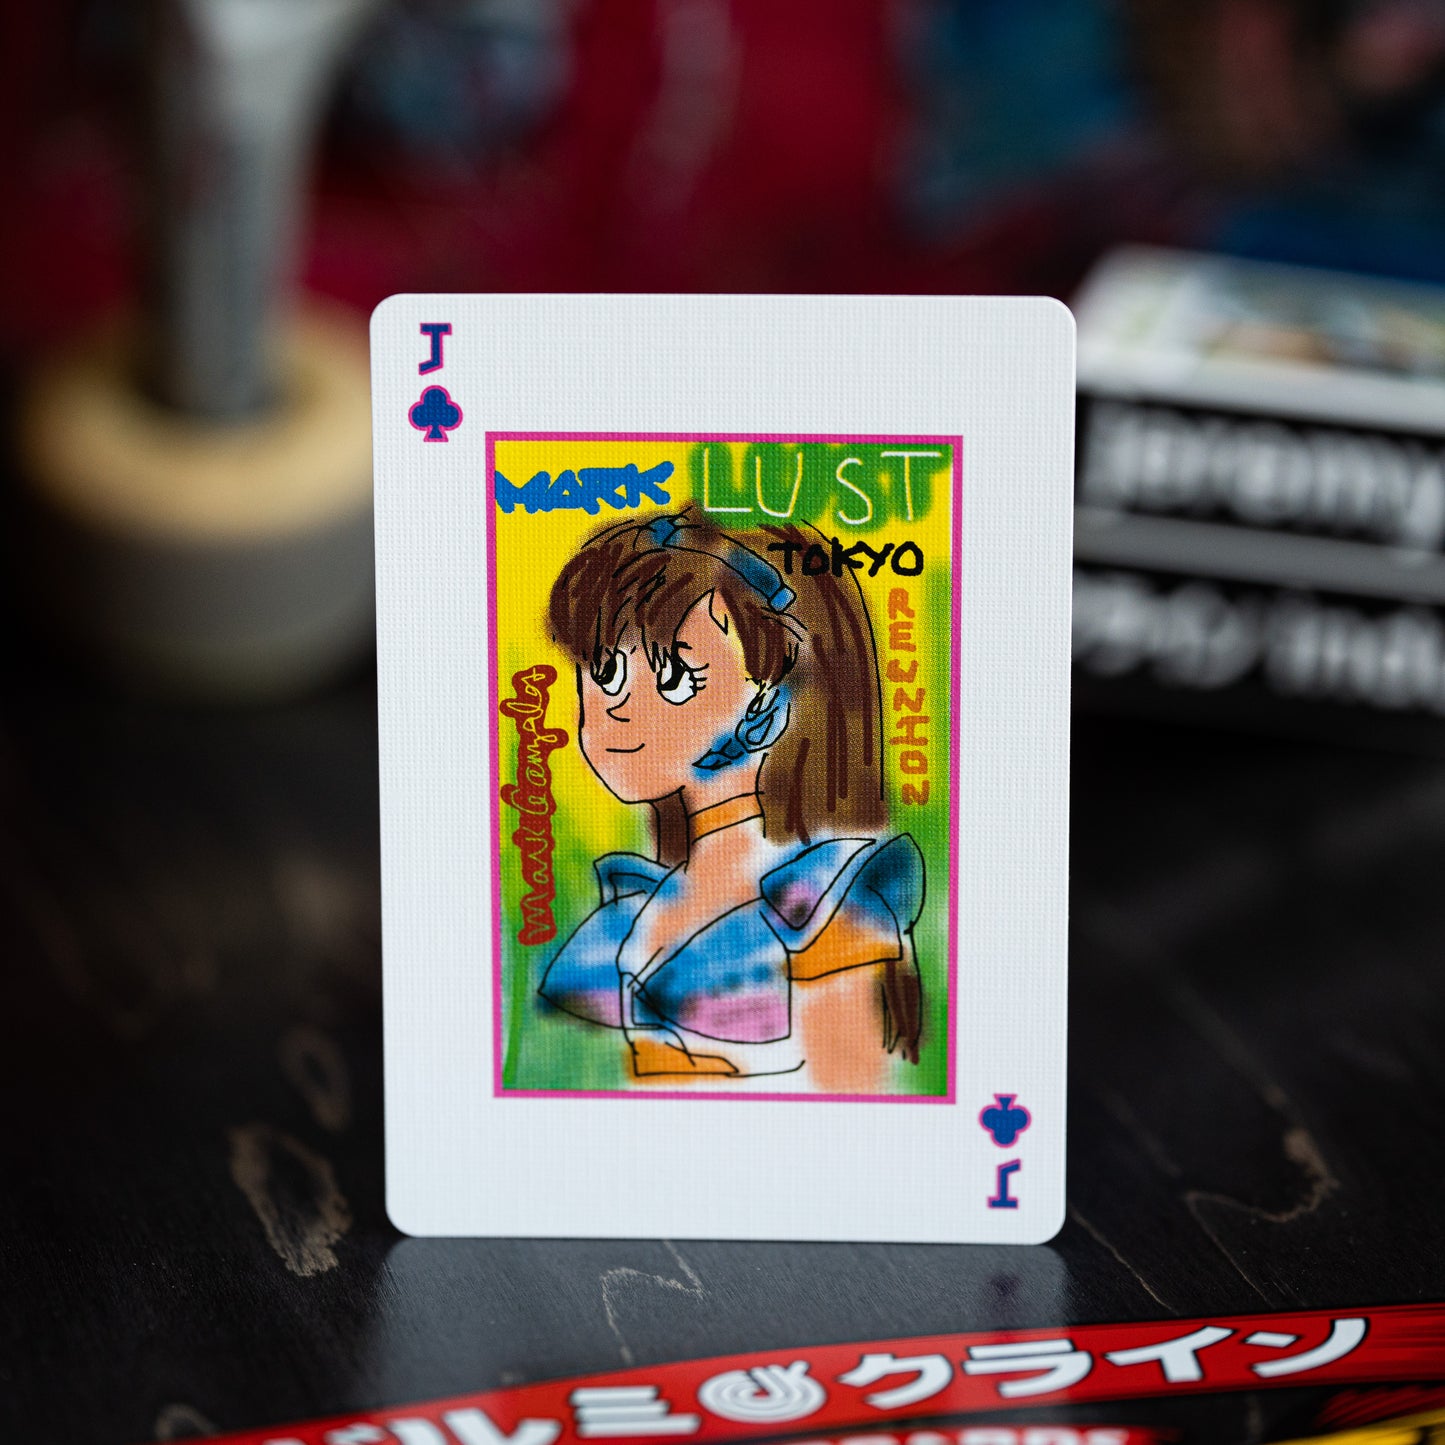 dream girl playing cards